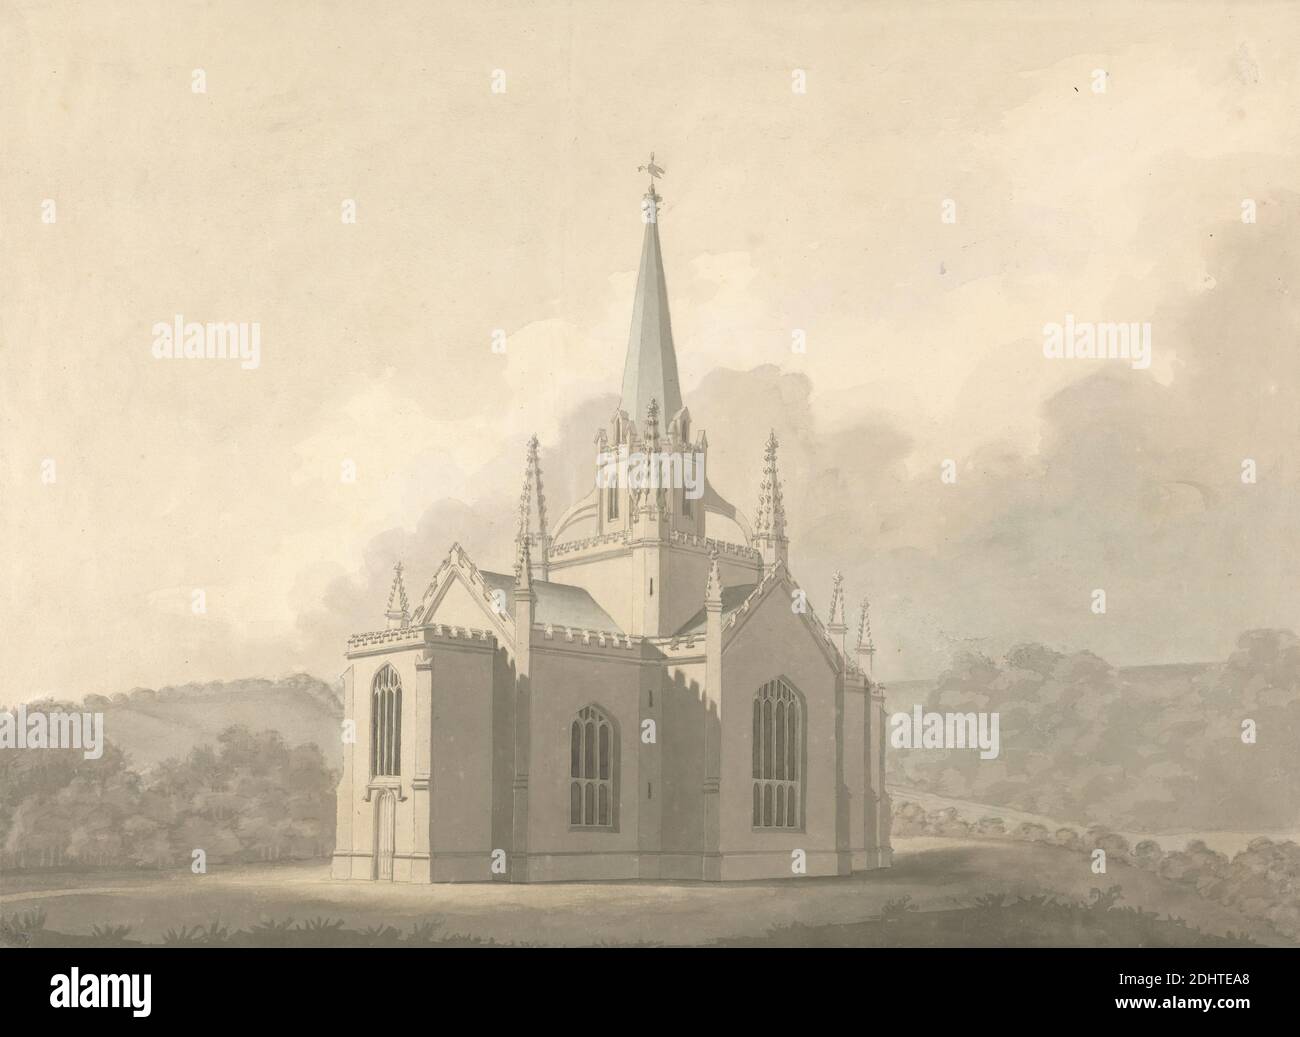 Thames Ditton, Surrey: Design for Gothic Church, Sir Robert Taylor, 1714–1788, British, ca. 1776, Graphite, pen and black ink and watercolor on medium, slightly textured, cream wove paper, Sheet: 11 7/8 x 15 7/8 inches (30.2 x 40.3 cm), architectural subject, church, designs, elevations (drawings), Gothic, lancet windows, landscape, spires, Surrey, Thames Ditton Stock Photo